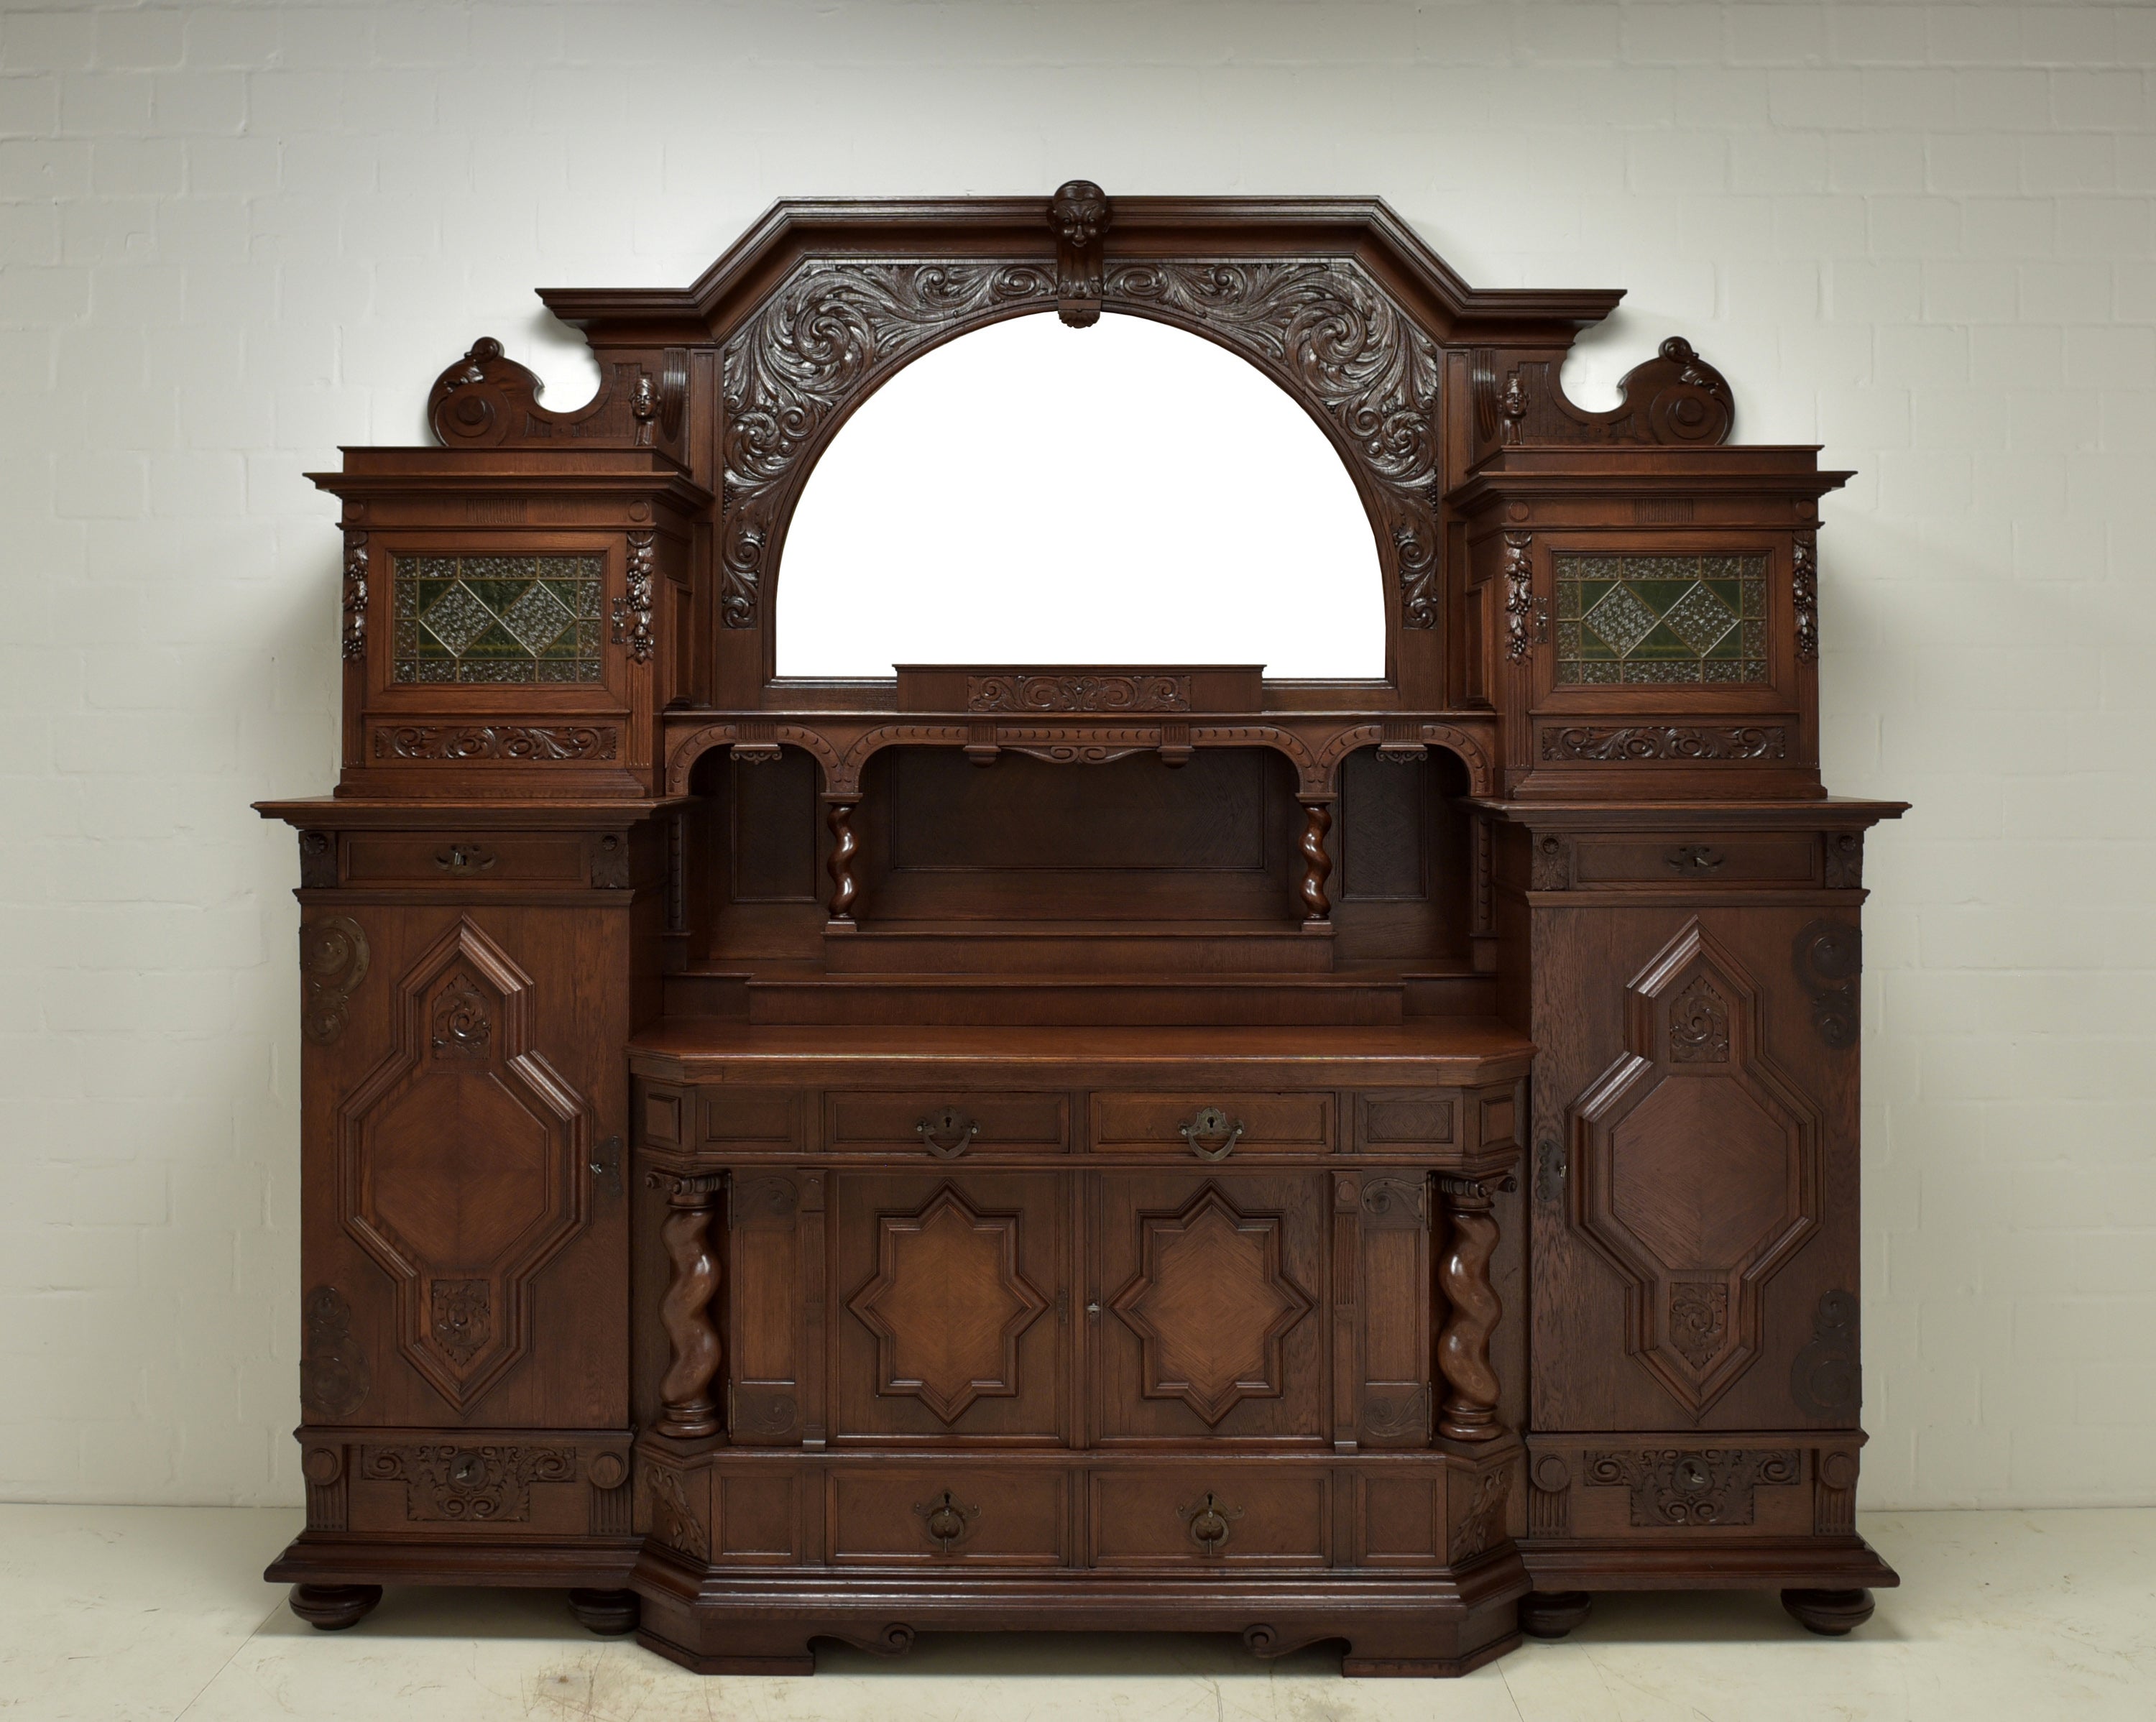 XXL buffet cabinet restored Art Nouveau / historicism oak sideboard

Features:
7-part model with various departments
Very high quality and complex processing
Original high quality fittings
All drawers dovetailed
Combination of stylistic